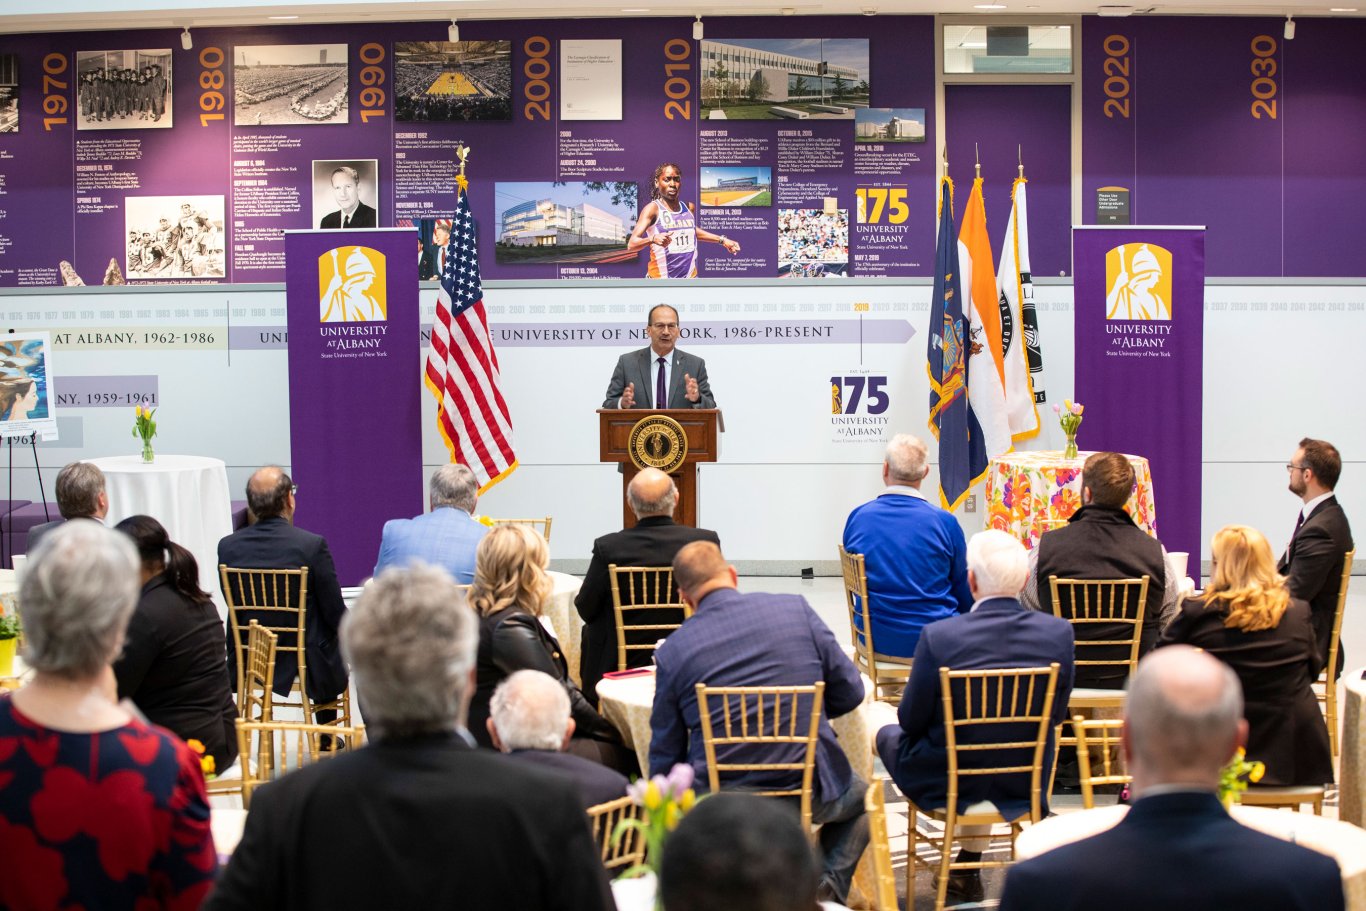 UAlbany President Havidán Rodríguez speaks at a podium in front of a room of people inside the University Hall atrium at UAlbany Showcase.